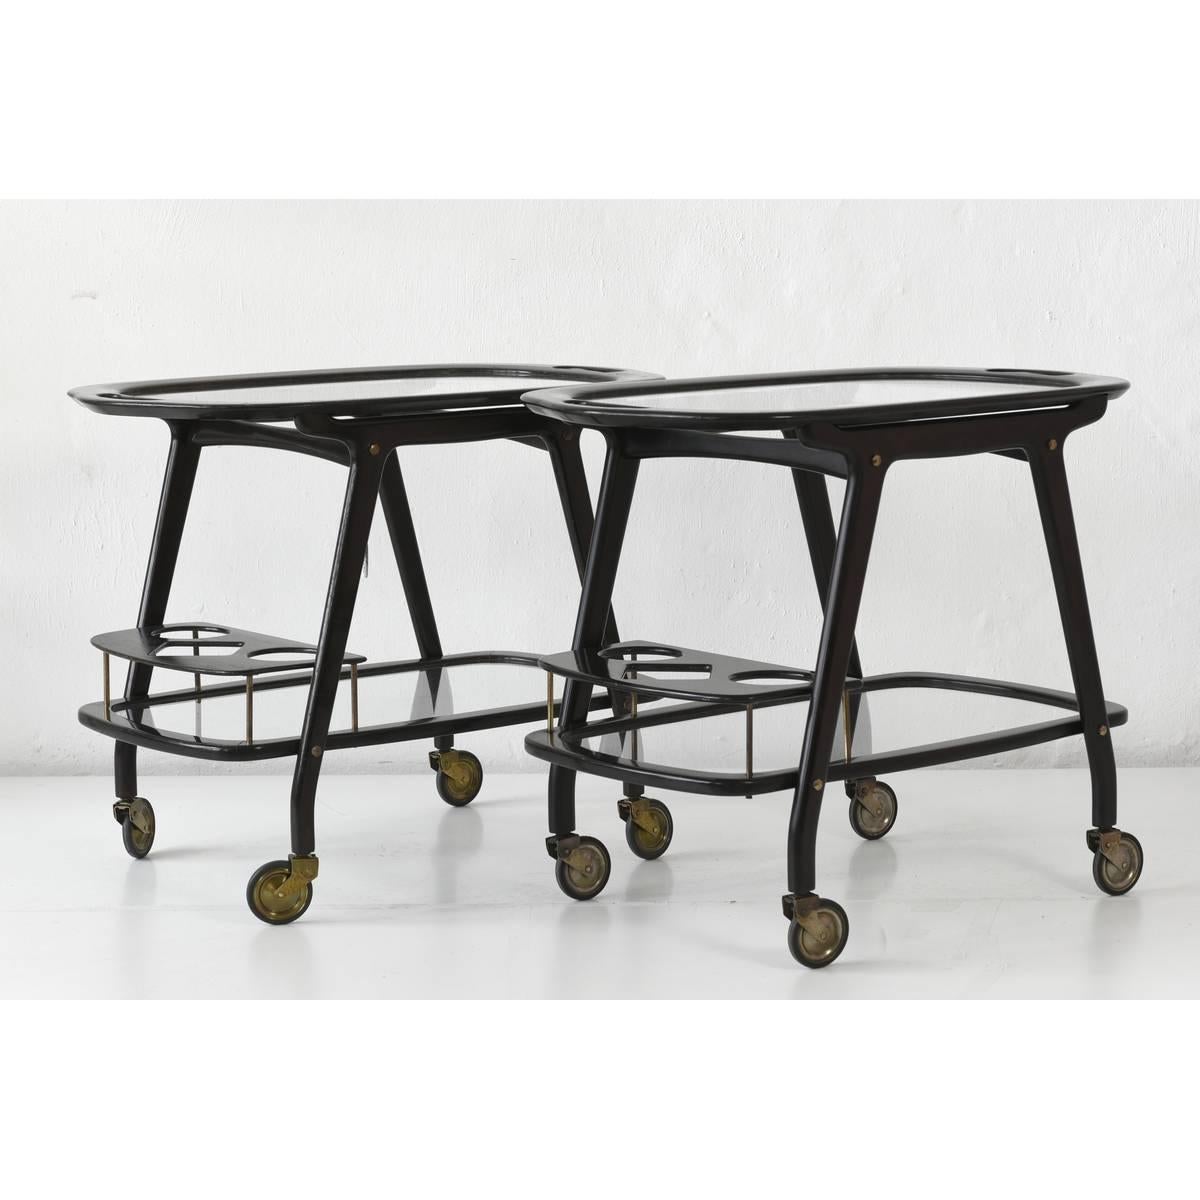 Cesare Lacca delivered a series of designs for innovative bar carts for Cassina. Again, this cart is quite formal in his time, with organic rounded shapes, rich gleaming wood and patinated brass determine the object.
The lower shelf is equipped